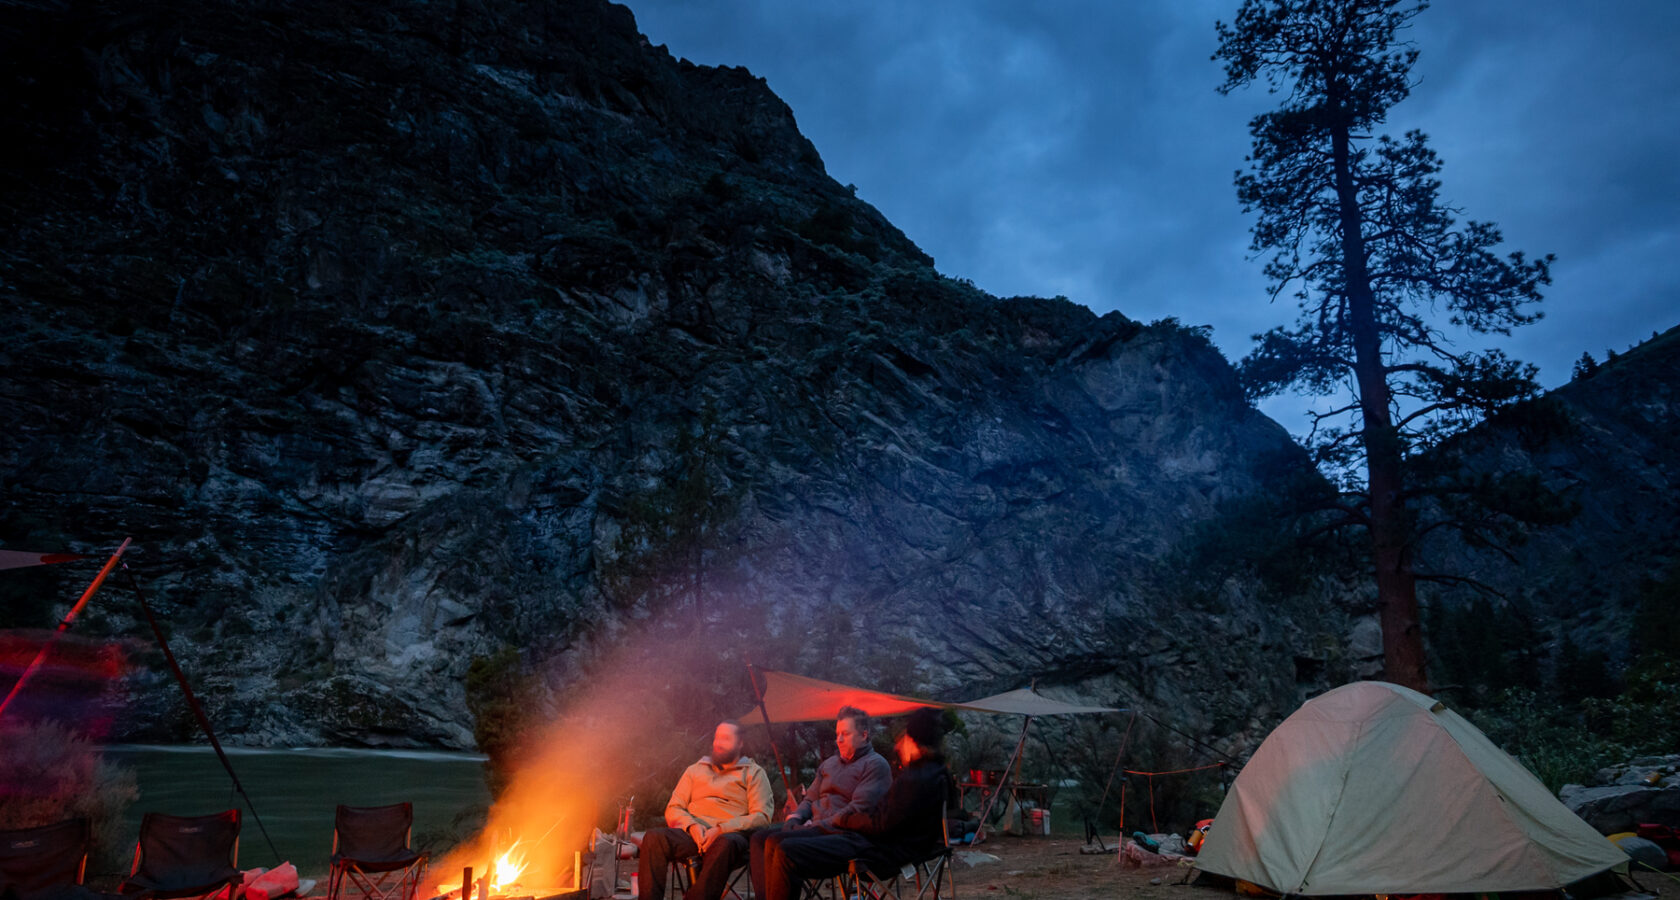 Enjoying the campfire on a beach near Idaho's Middle Fork of the Salmon River.